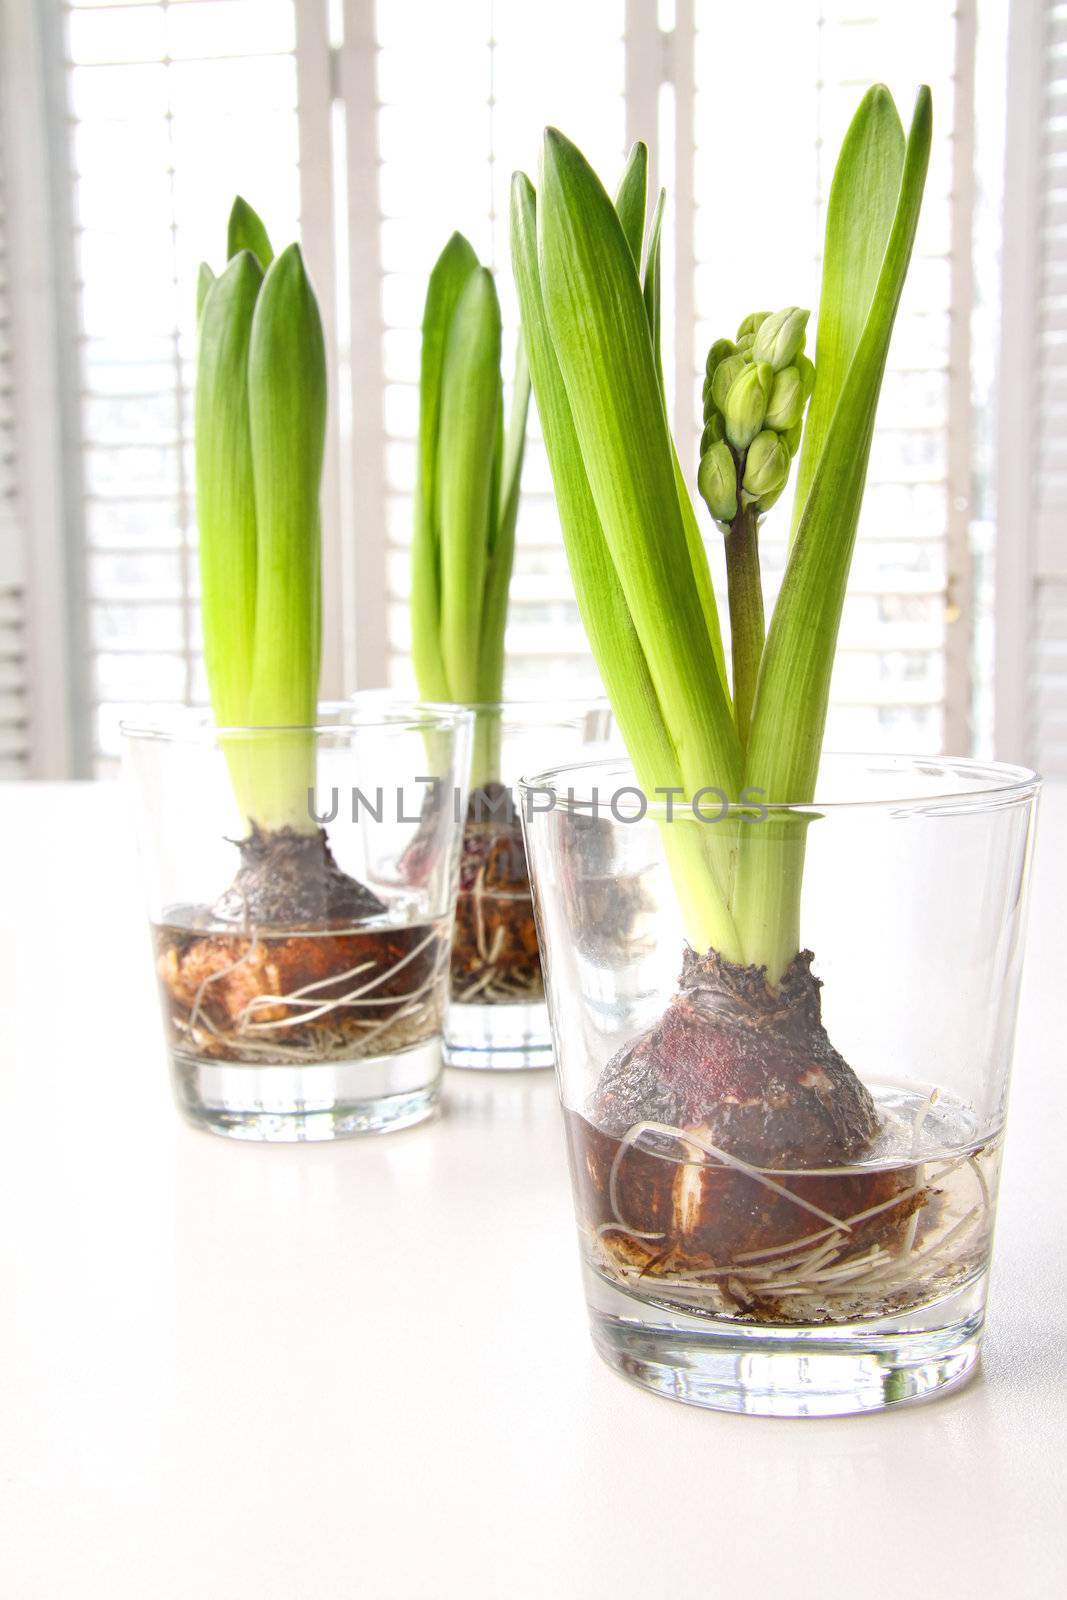 Spring hyacinth bulbs in glass containers by Sandralise